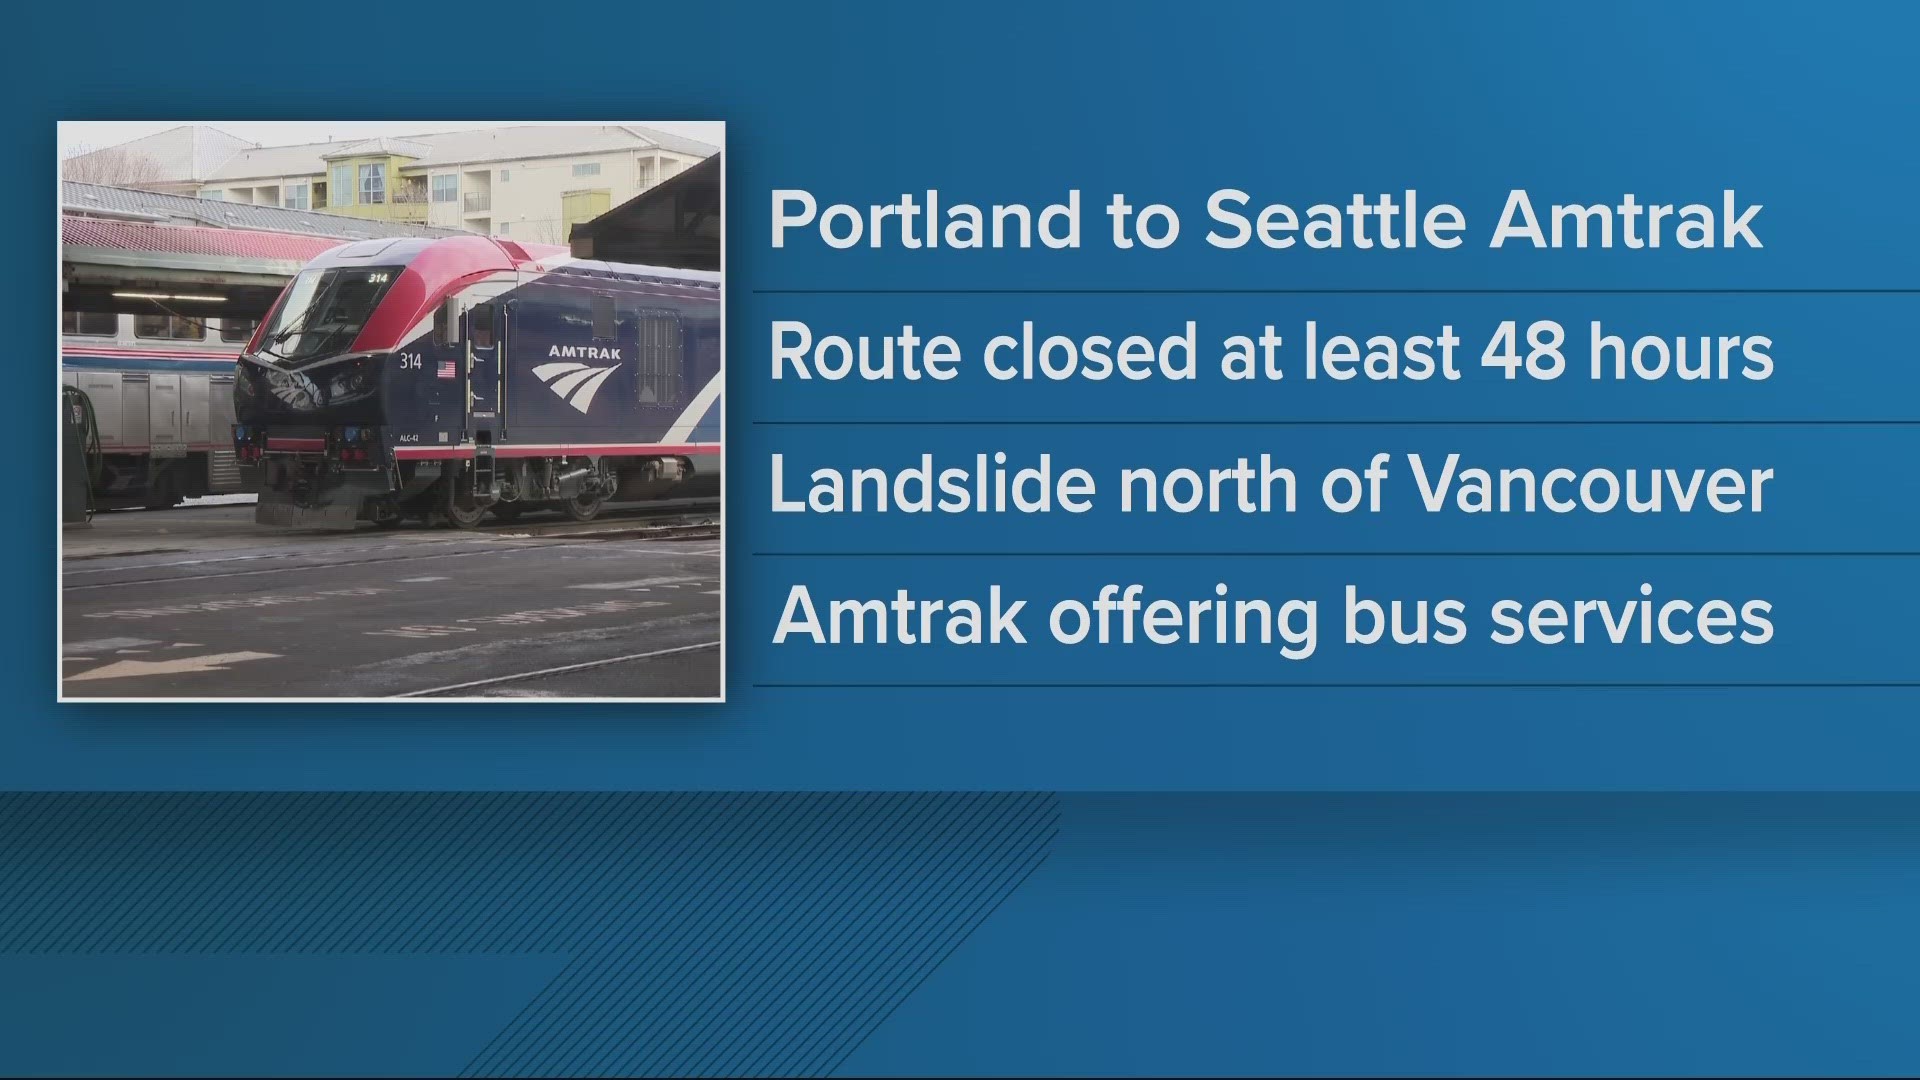 The landslide is six miles north of Vancouver, Washington. Amtrak said service between Portland and Seattle is impacted through May 10.